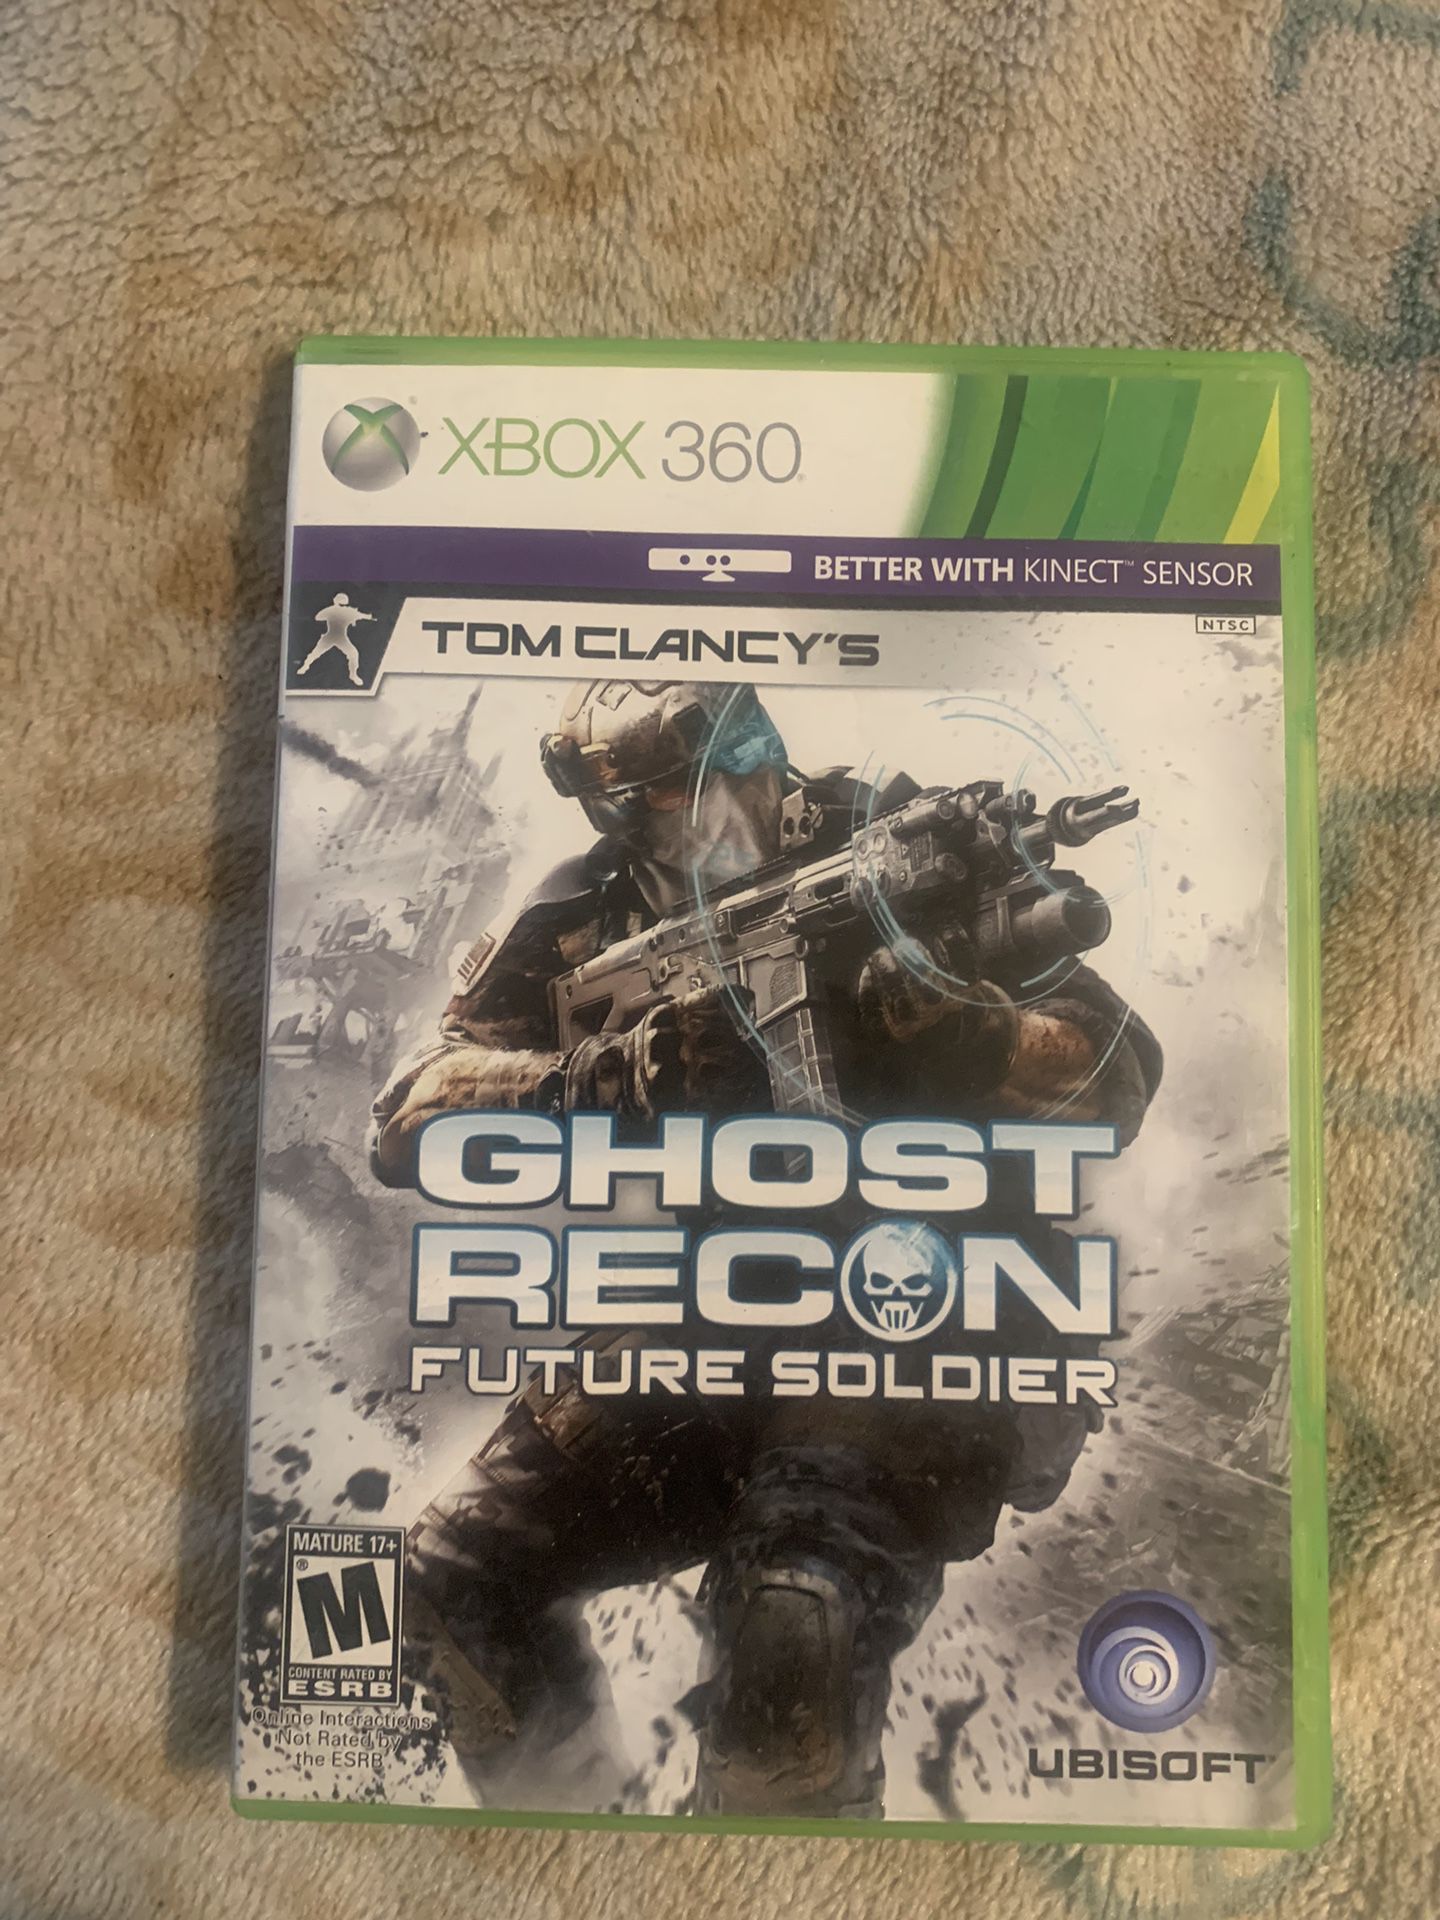 Ghost Recon Future Soldier For Xbox 360 Comes With Case Book And Game